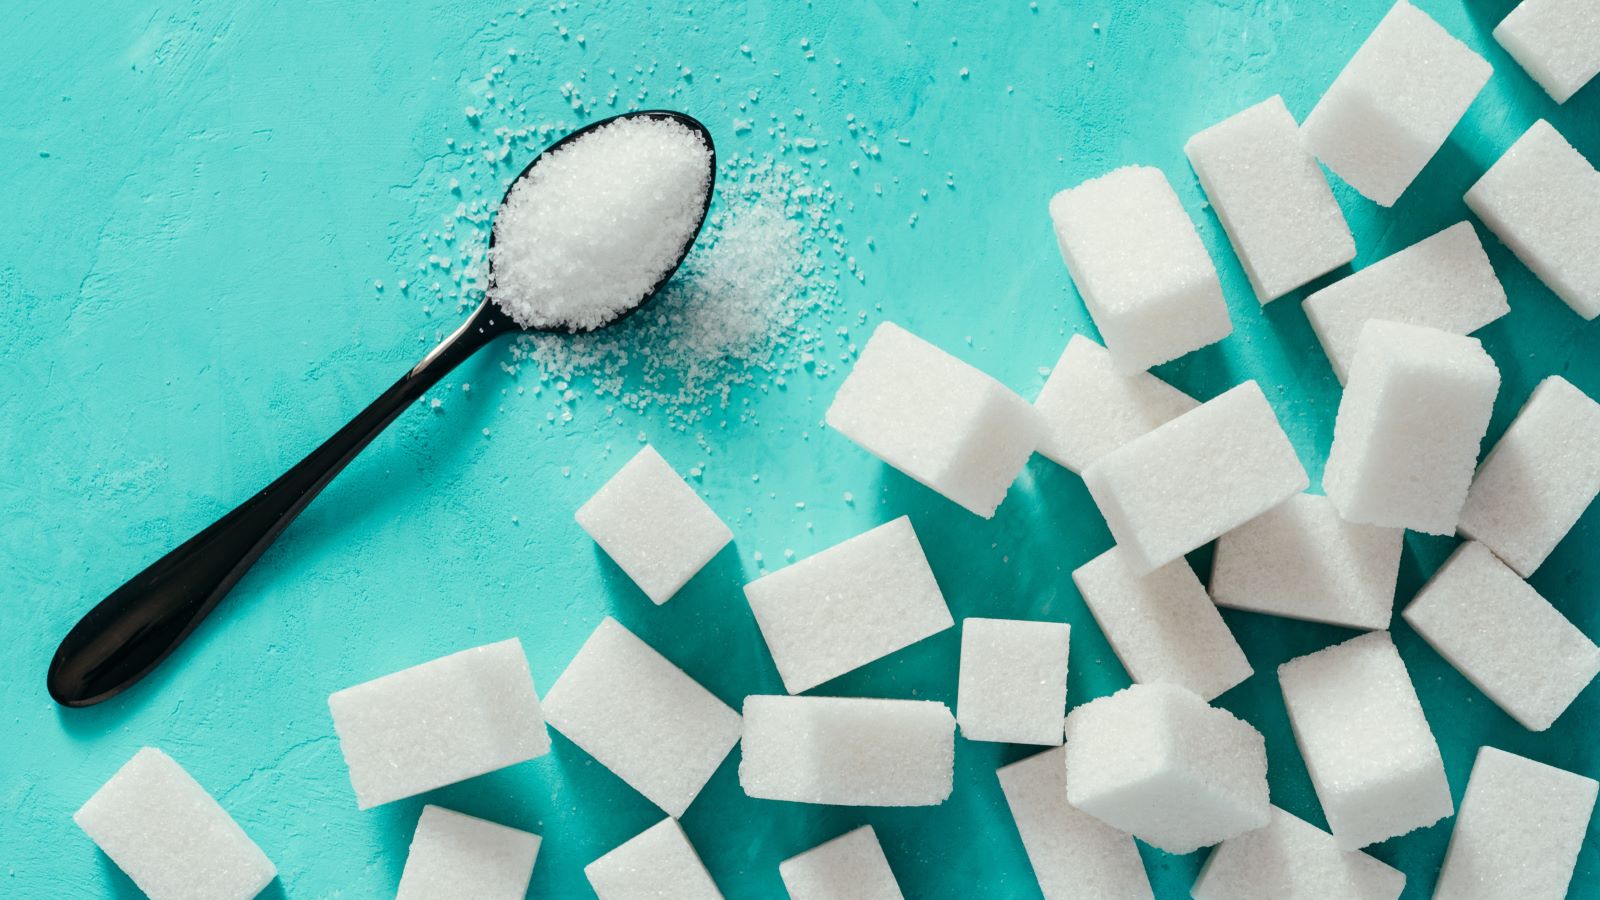 We all know that sugar is an issue if you have diabetes or other chronic health conditions. But does sugar cause or feed cancer cells?